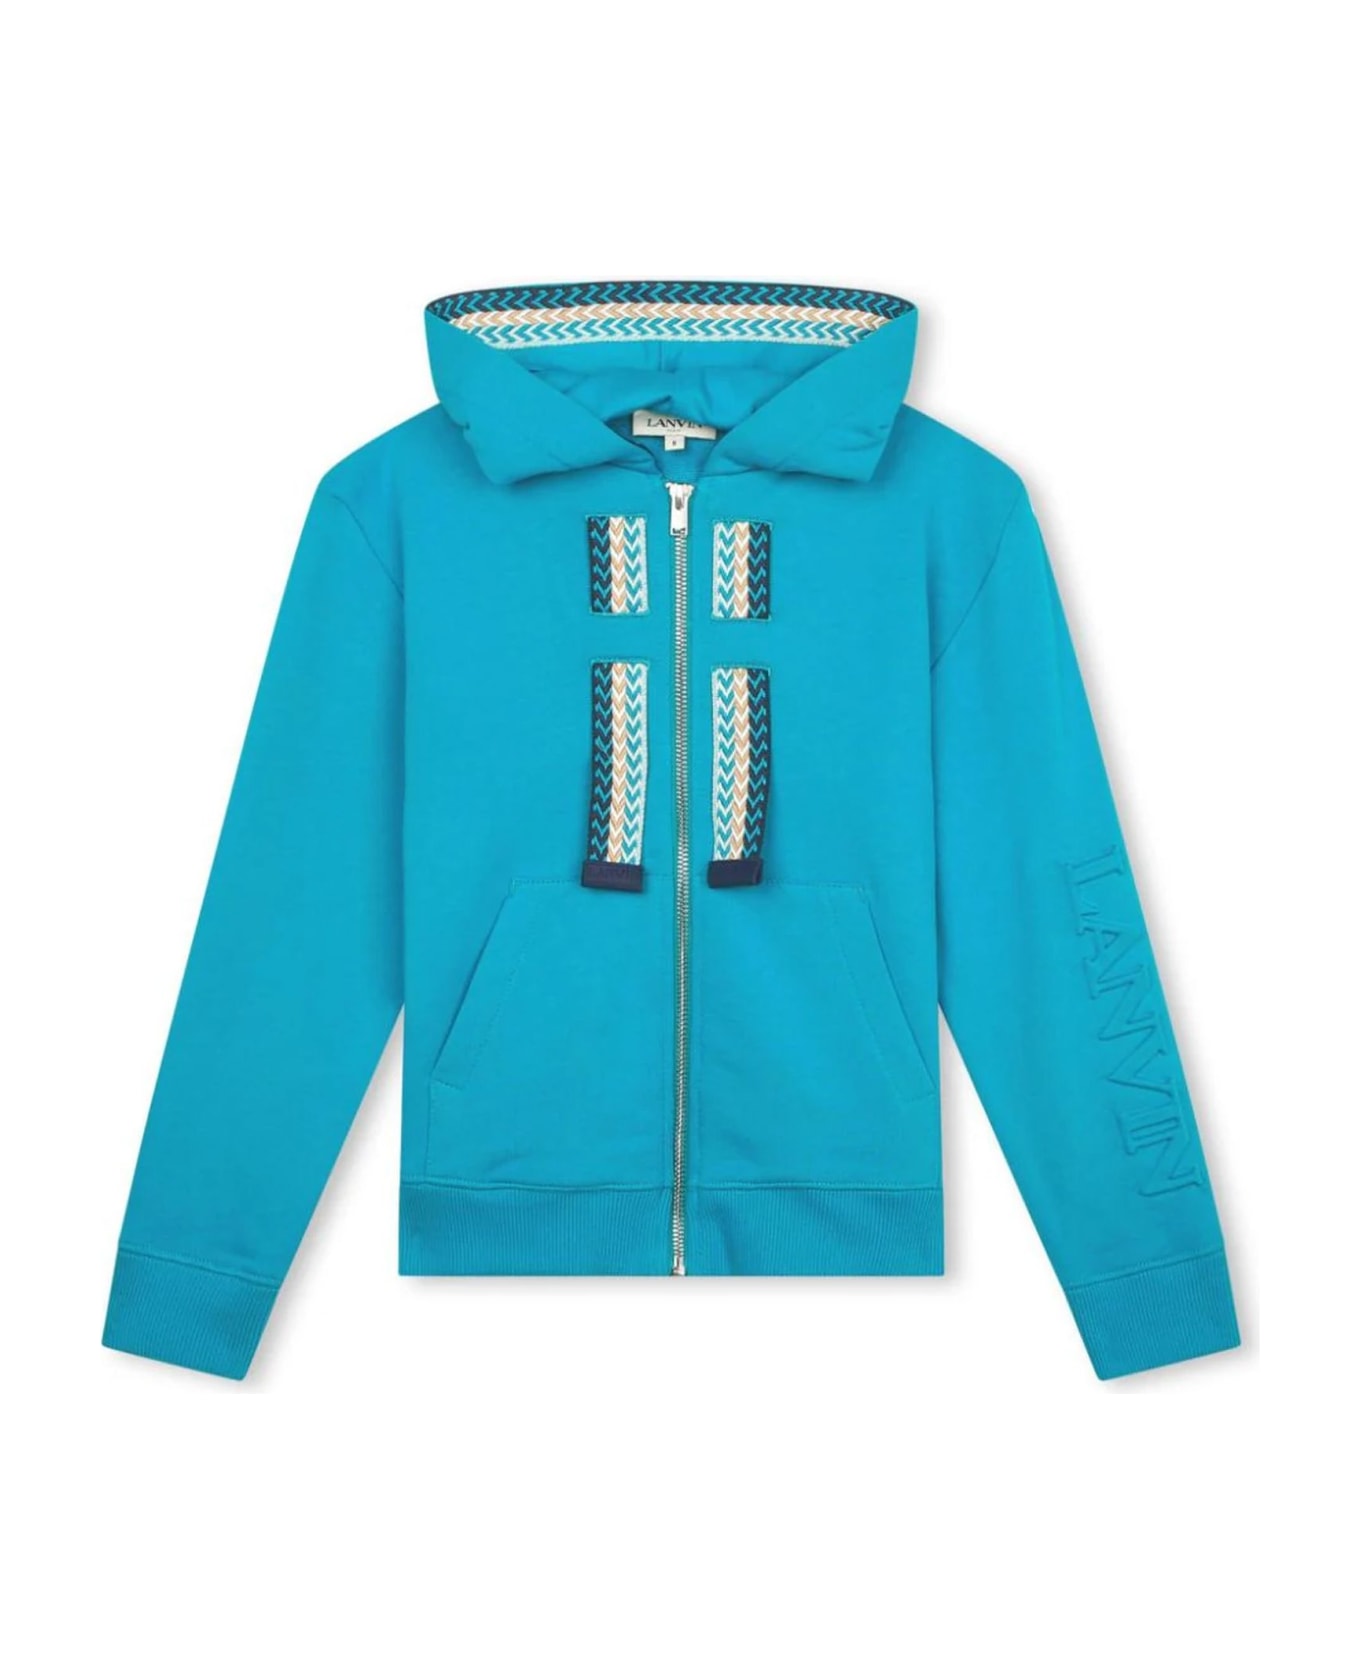 Lanvin Sweaters Turquoise - Turquoise